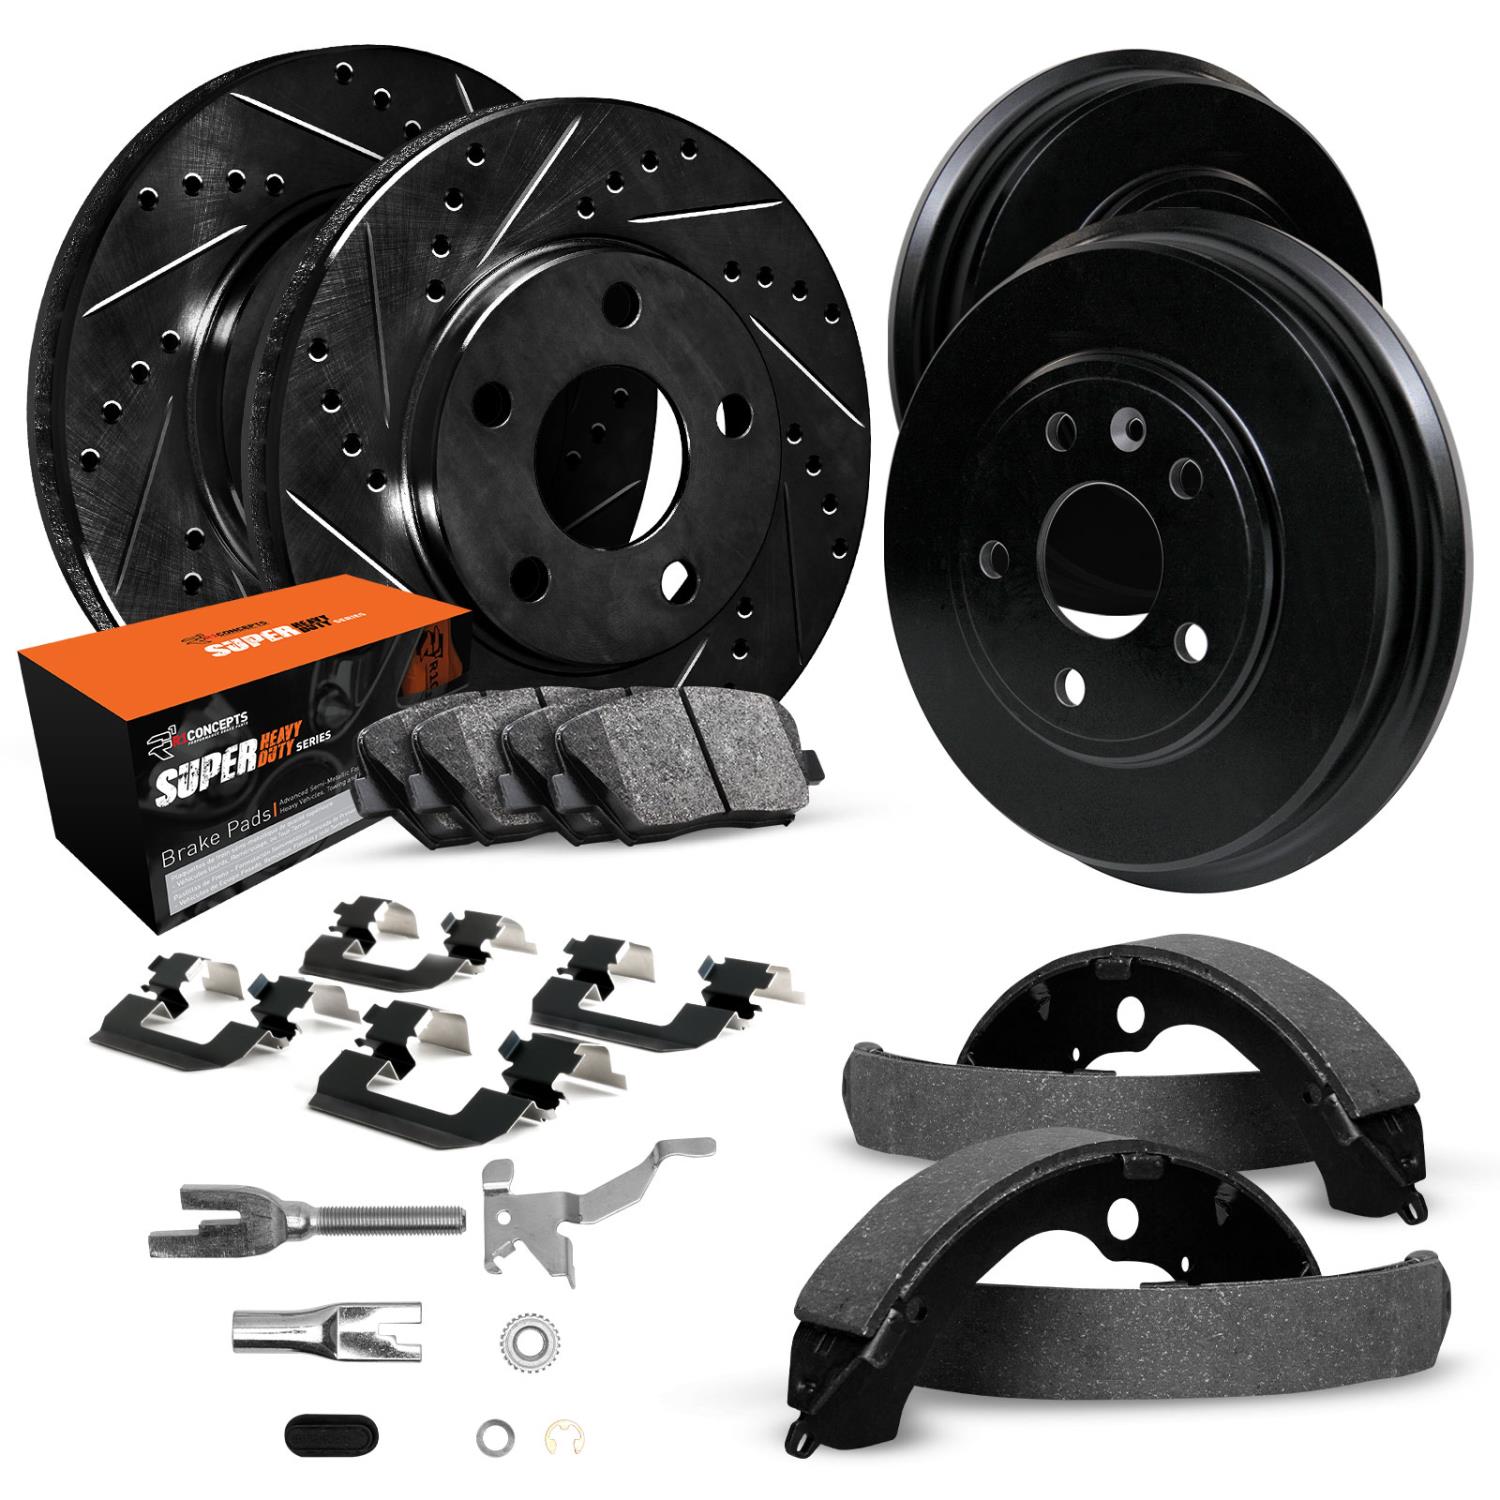 E-Line Drilled/Slotted Black Rotor & Drum Set w/Super-Duty Pads, Shoes, Hardware/Adjusters, 1986-1989 Ford/Lincoln/Mercury/Mazda